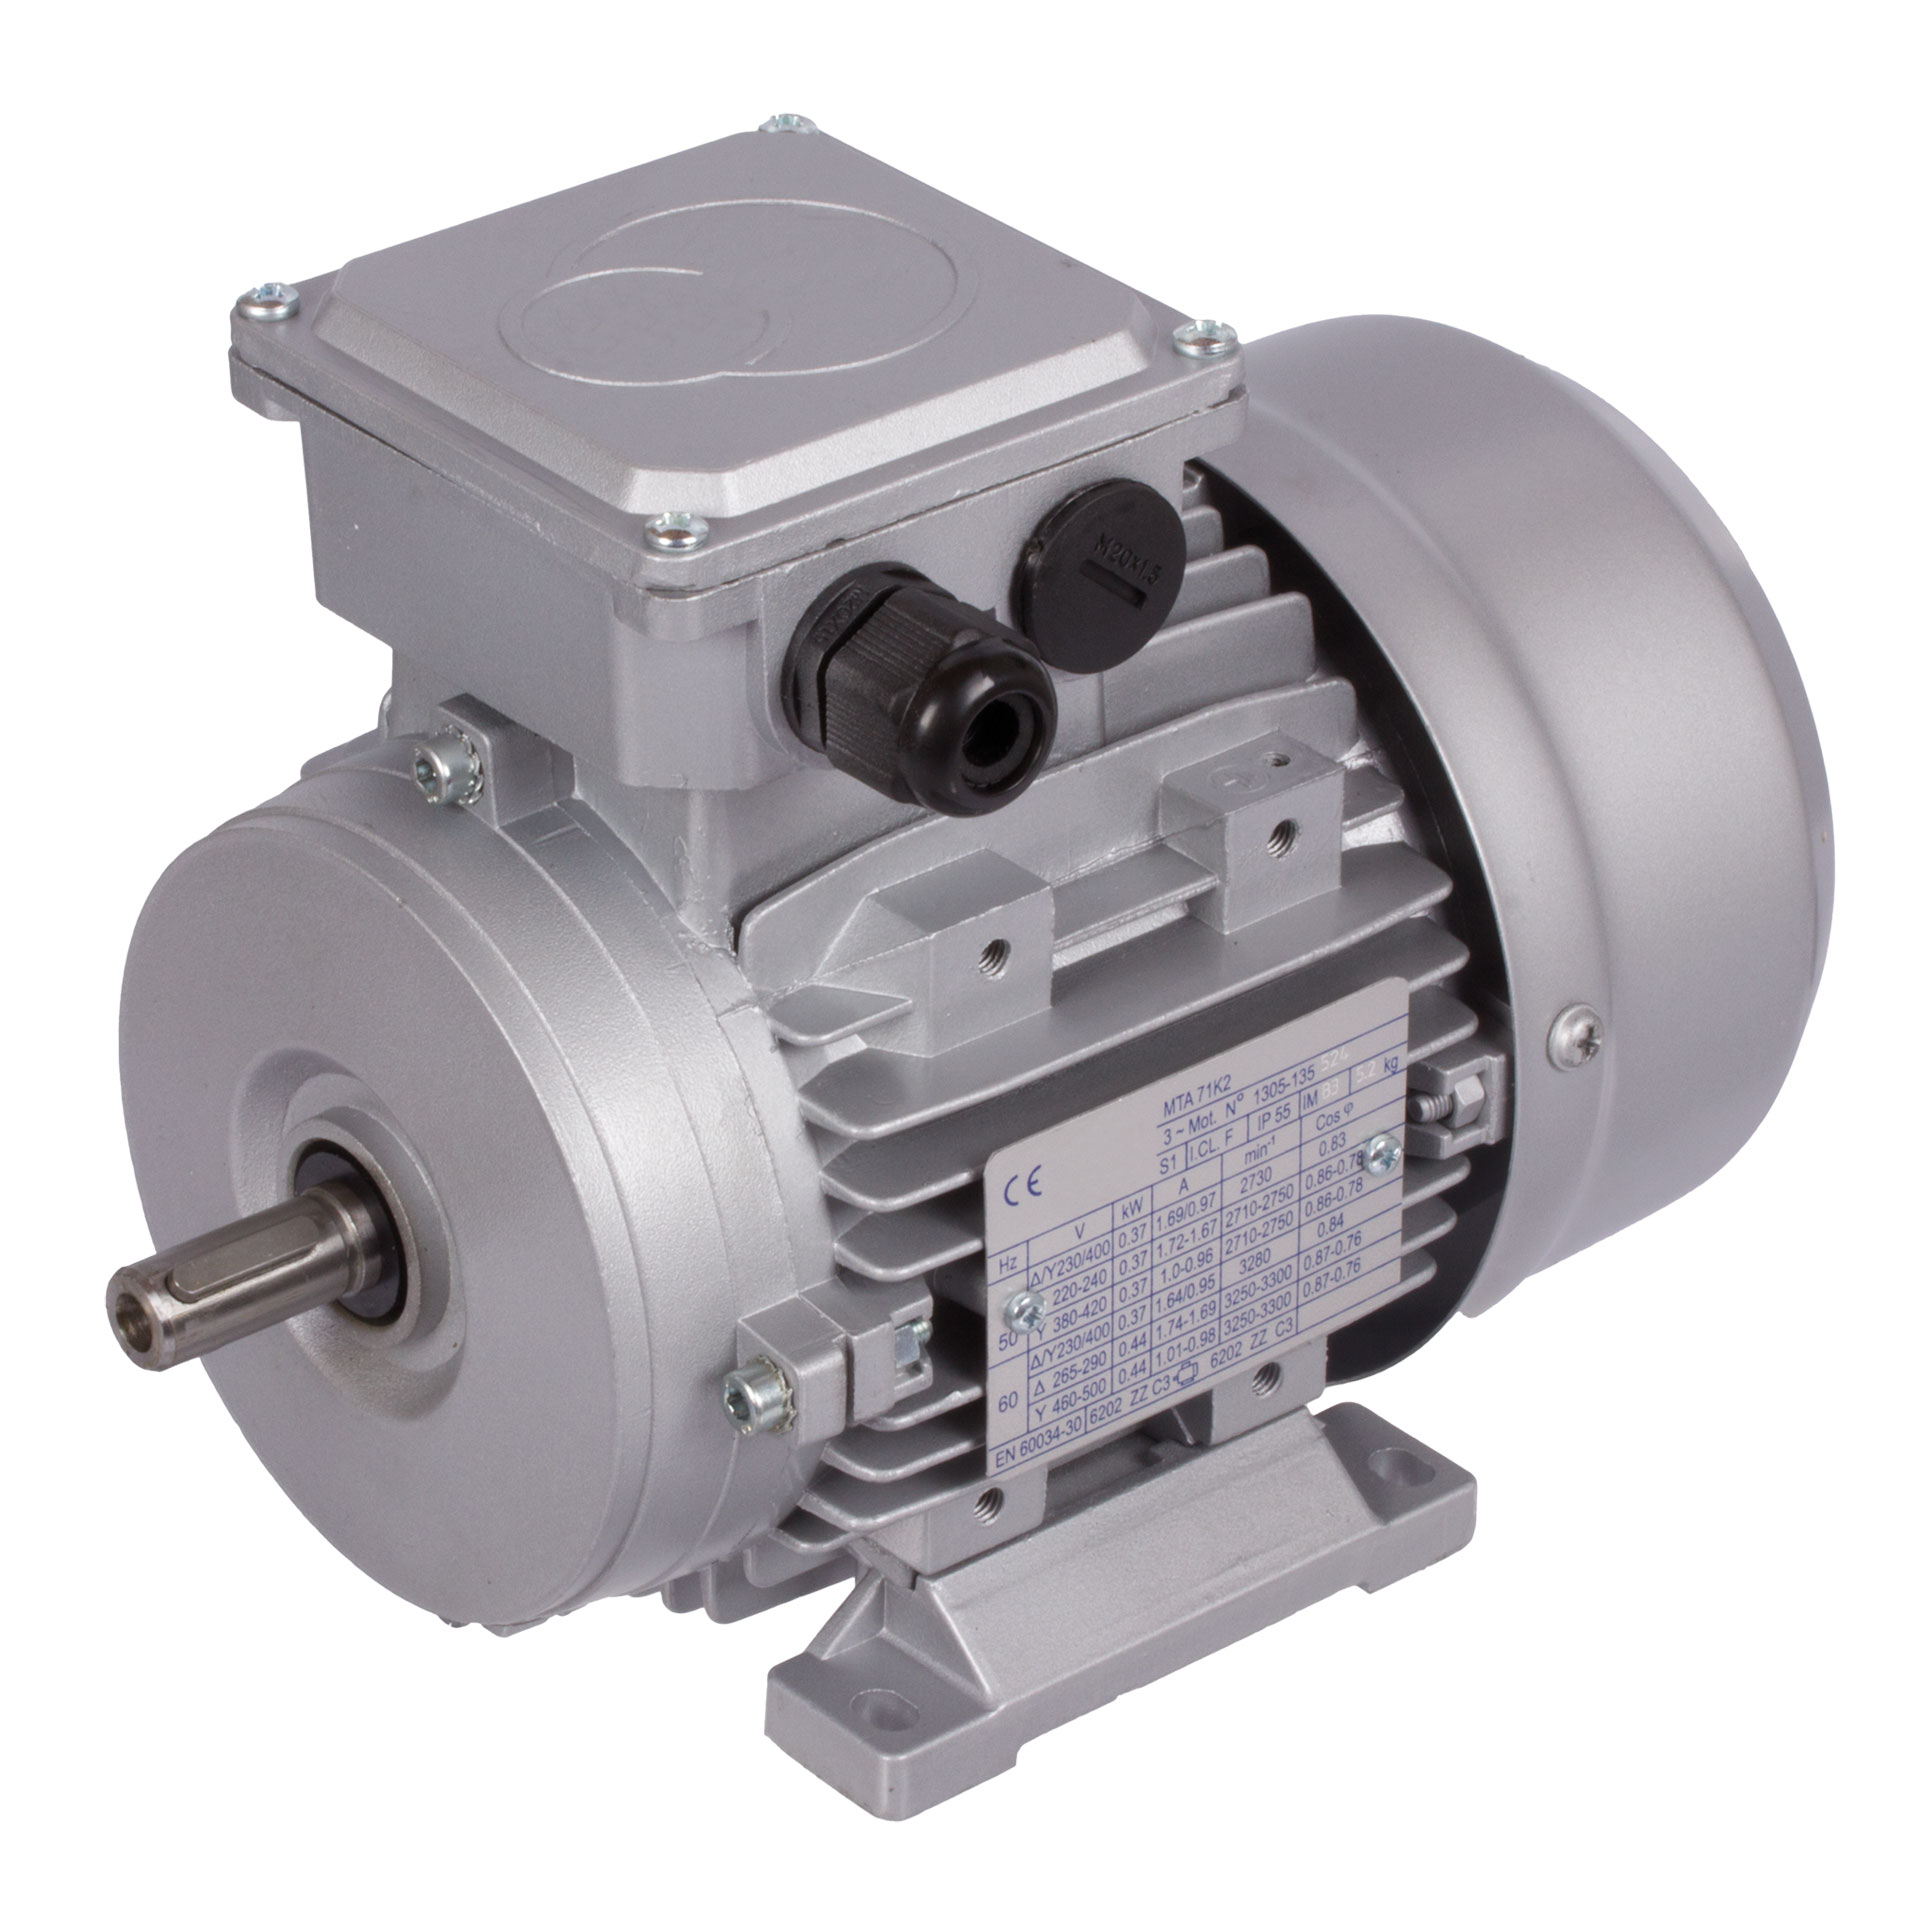 Standard three phase motor SM/I 230/400V 50Hz 0.75kW ca. 2890 rpm size 80  model B3 efficiency class IE3 (For operating instructions please visit the  download area of our website www.maedler.de) SKU: 43000700 